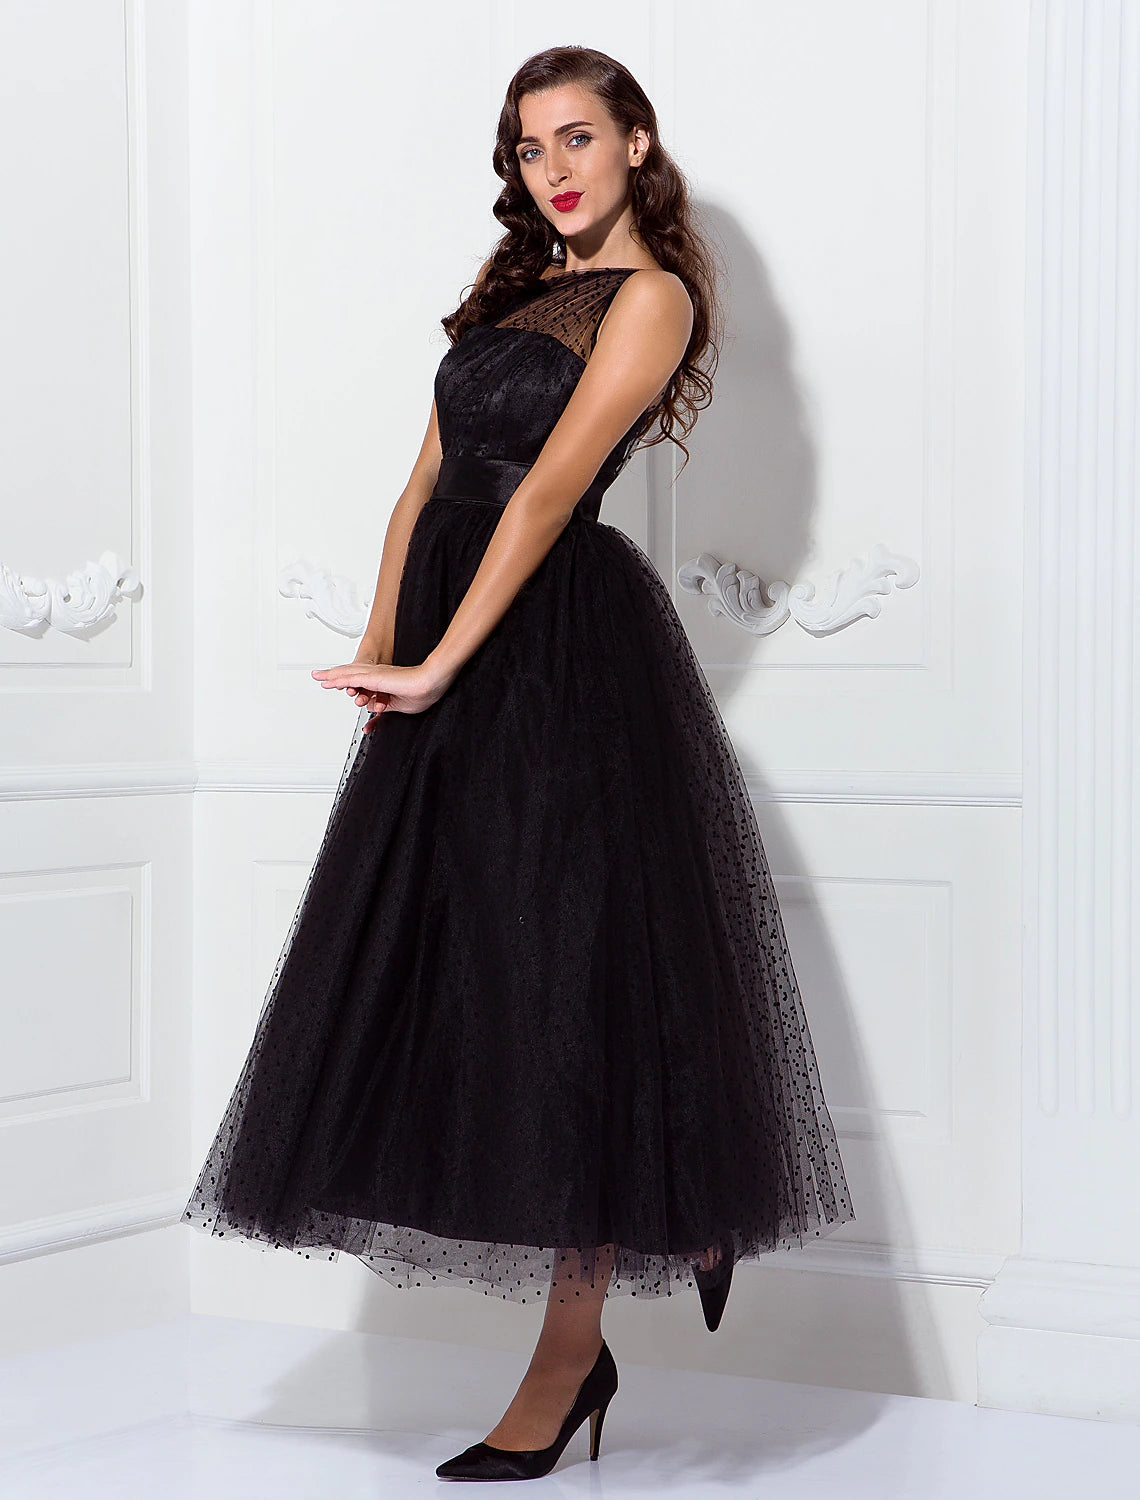 A-Line Cocktail Dresses Vintage Dress Wedding Guest Cocktail Party Ankle Length Sleeveless One Shoulder Wednesday Addams Family Tulle with Pleats Pattern / Print